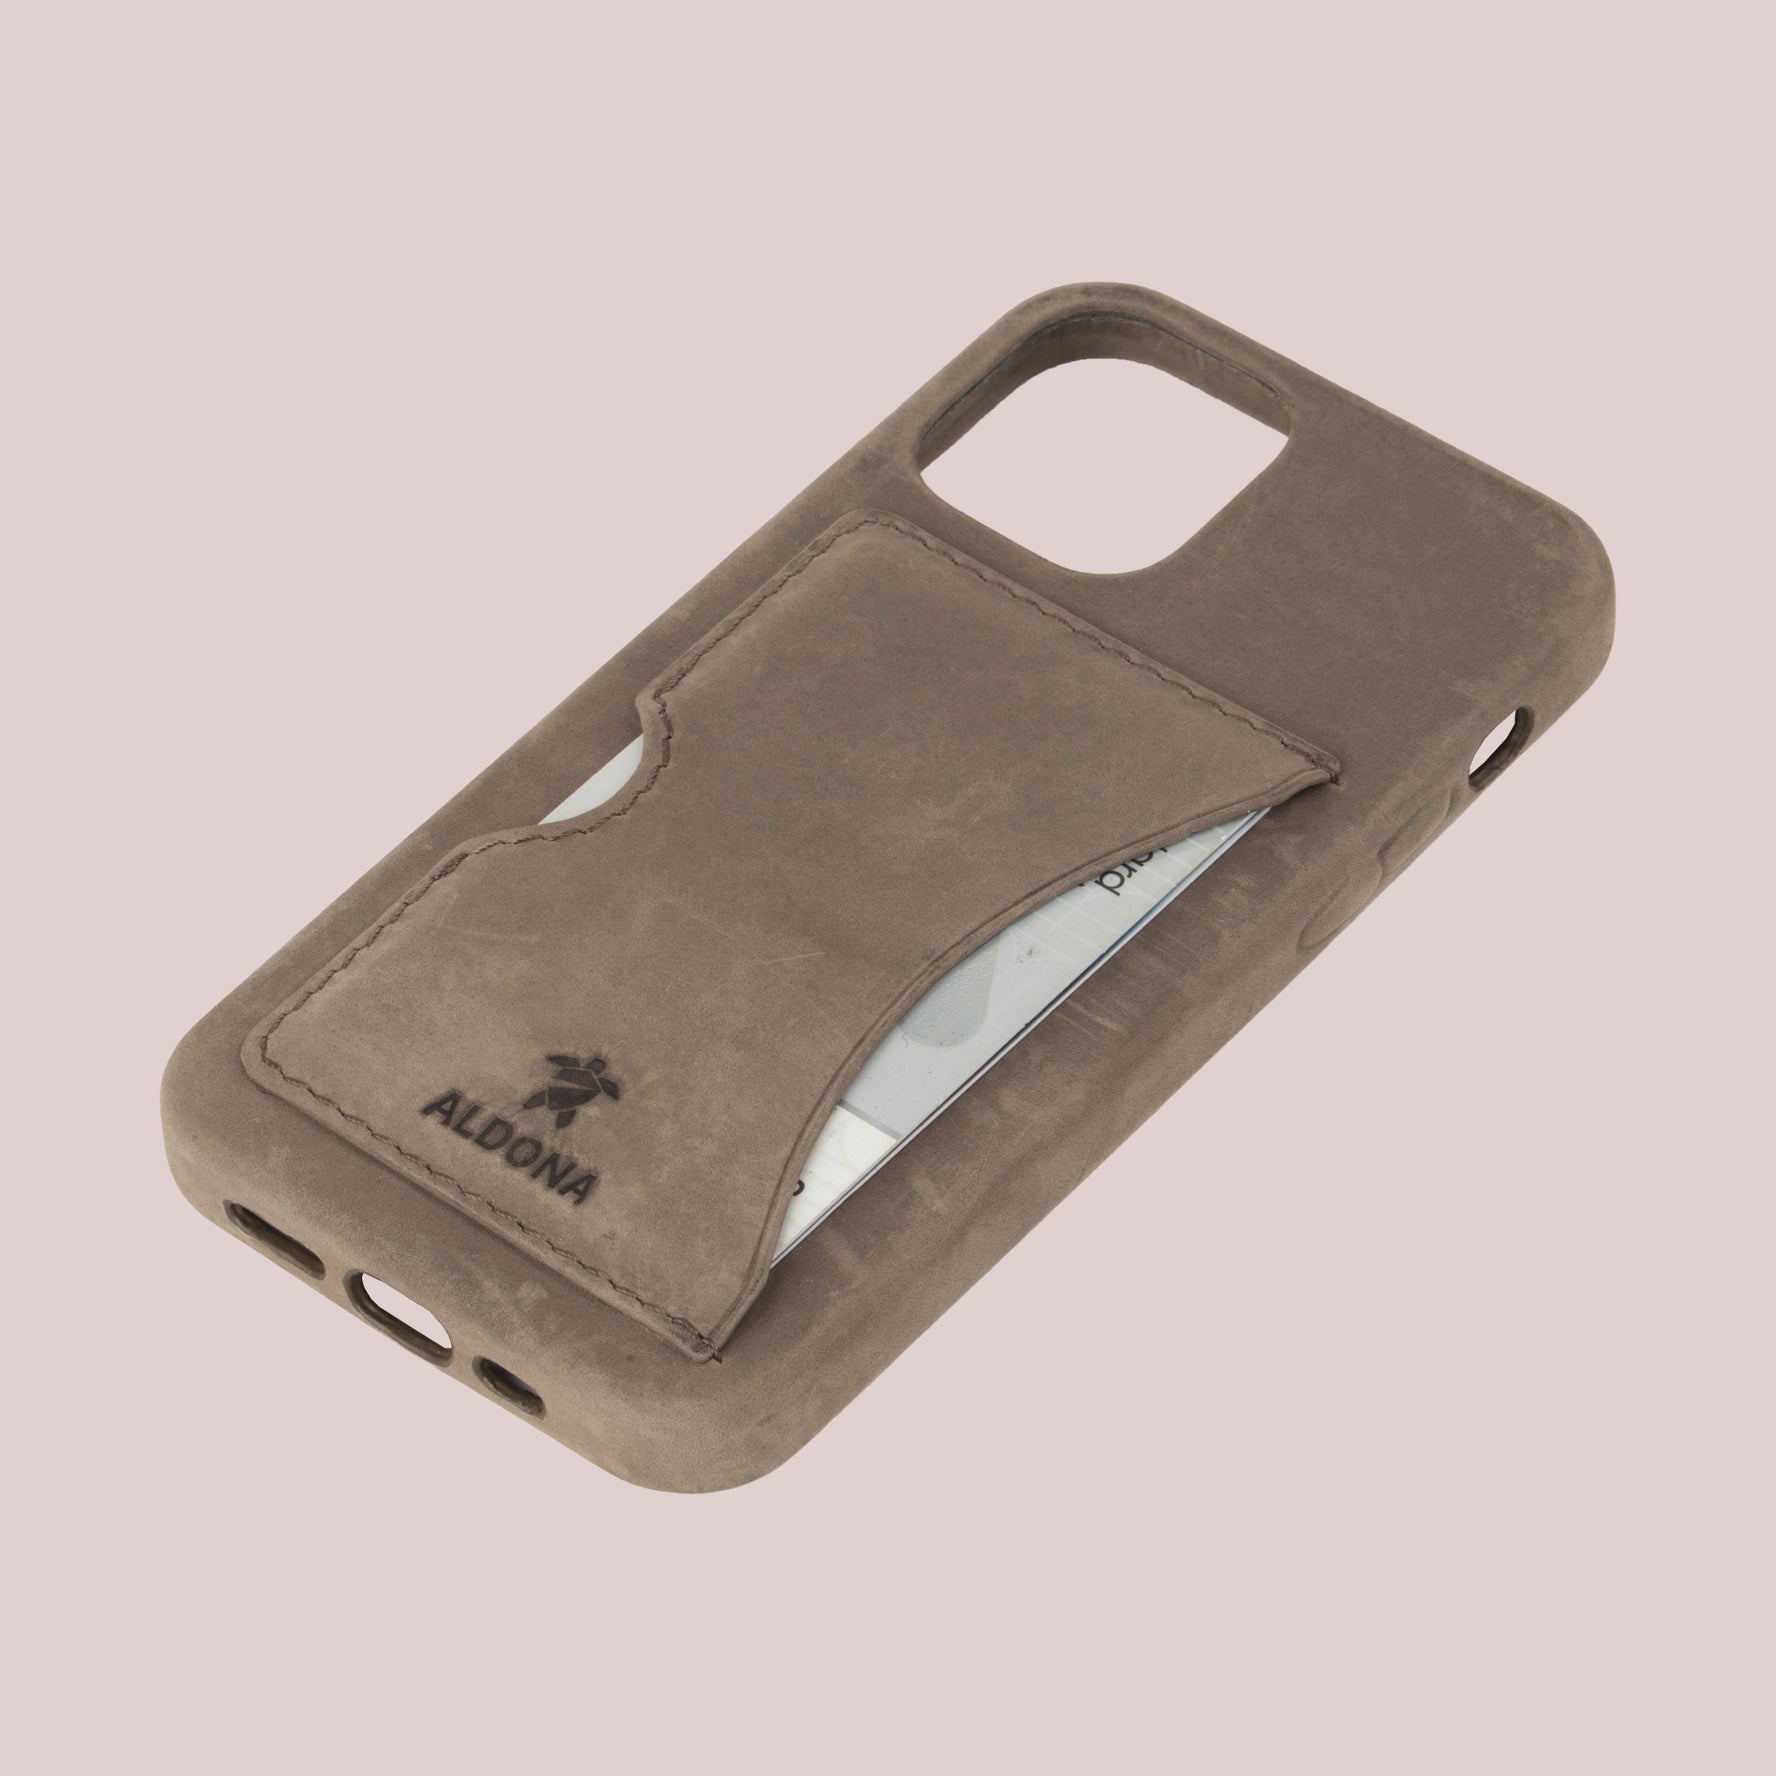 Baxter Card Case for iPhone 12 Series - Burnt Tobacco